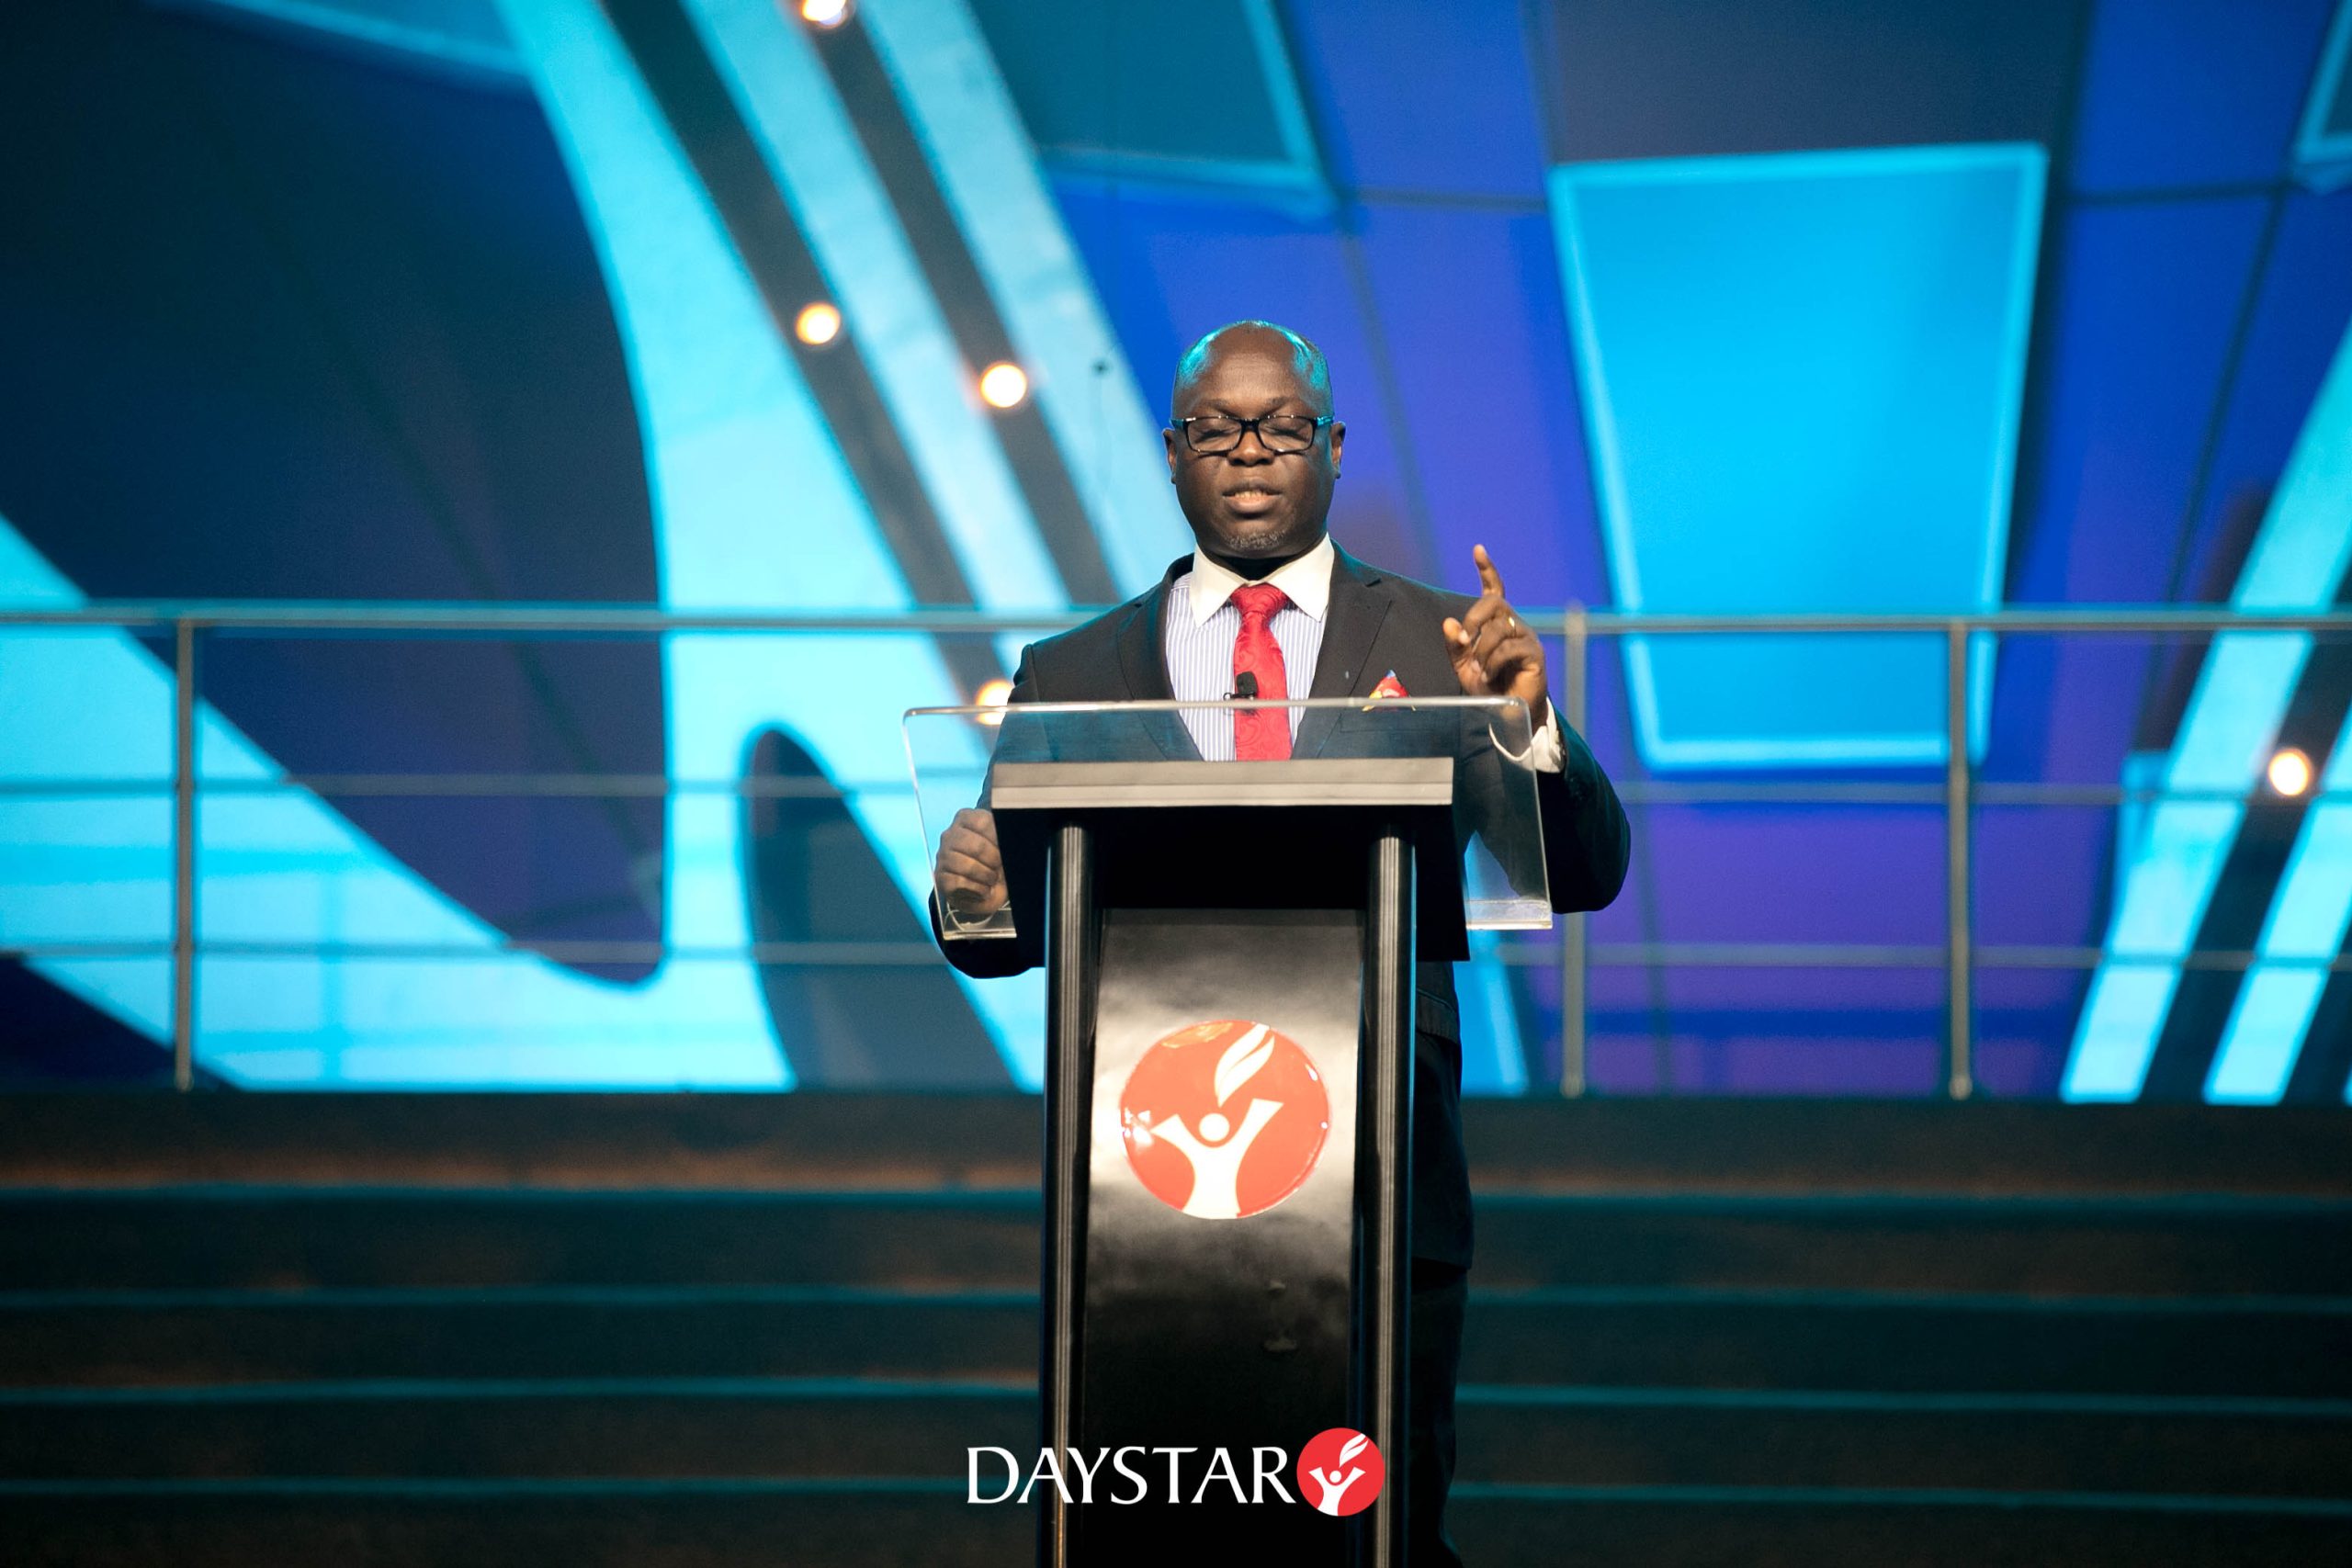 Daystar Christian Centre - Midweek service - The Positive Influencer.